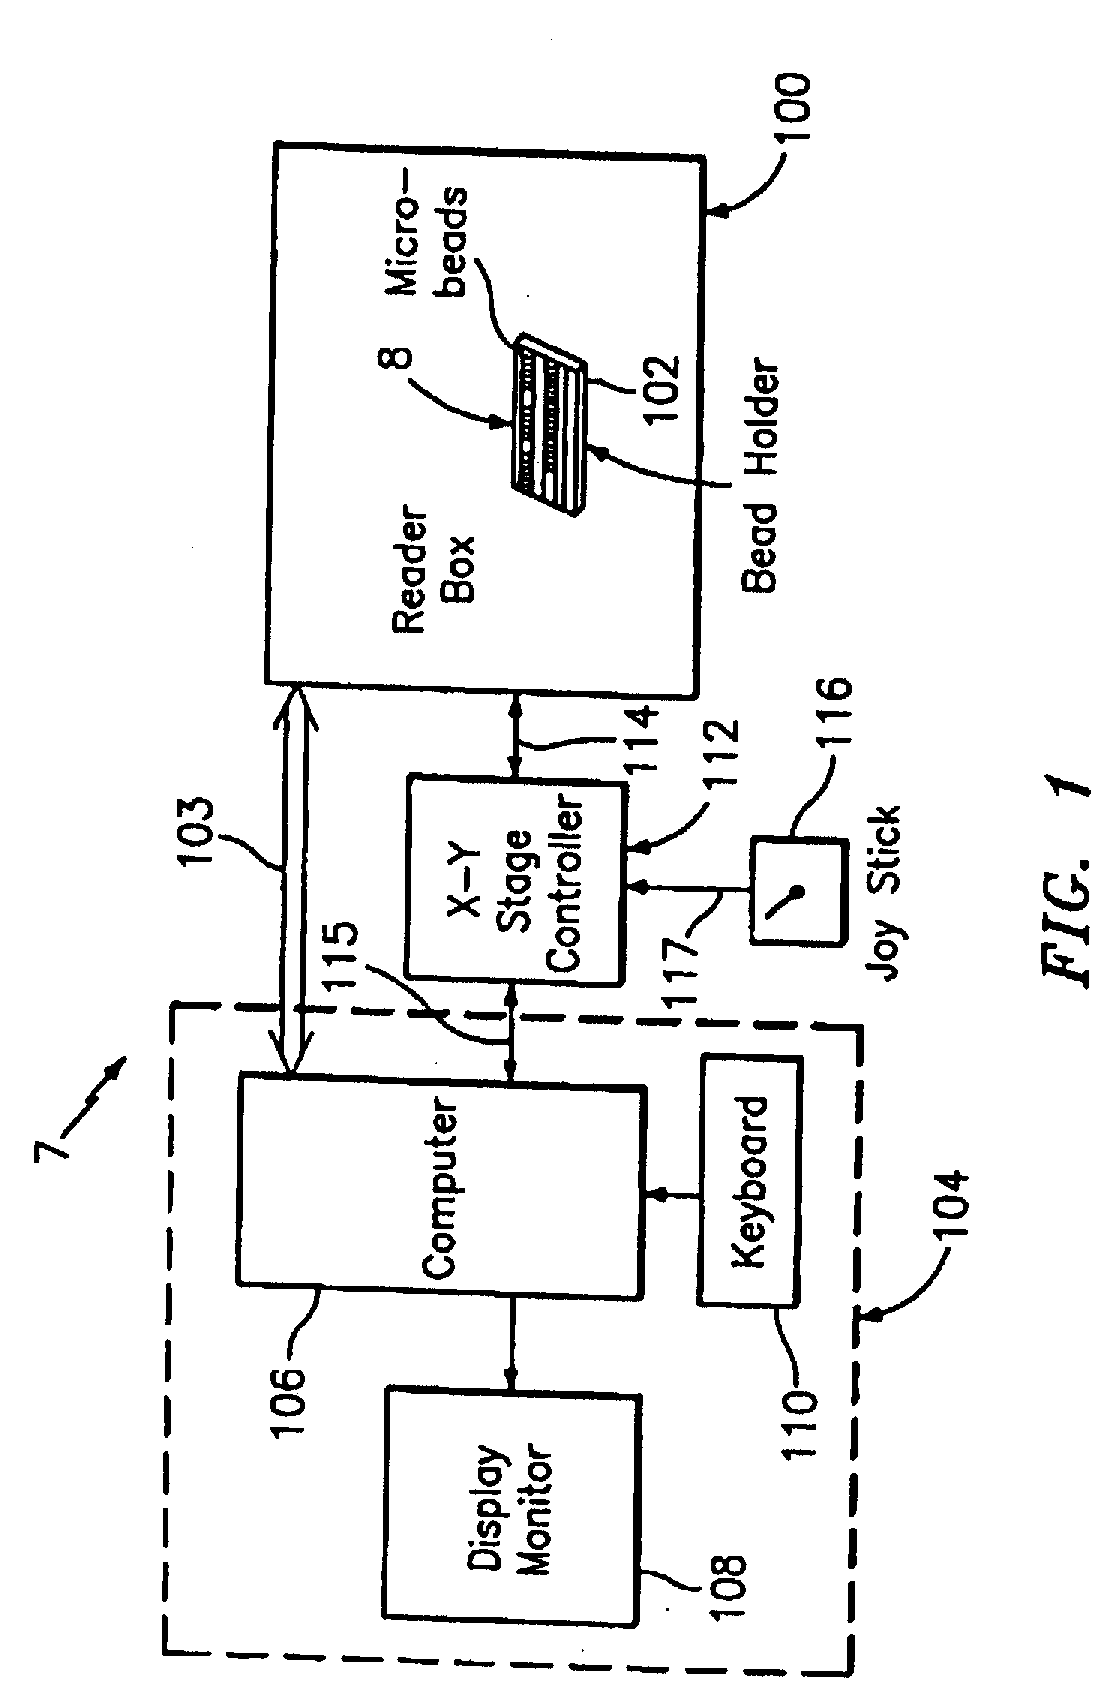 Optical reader system for substrates having an optically readable code